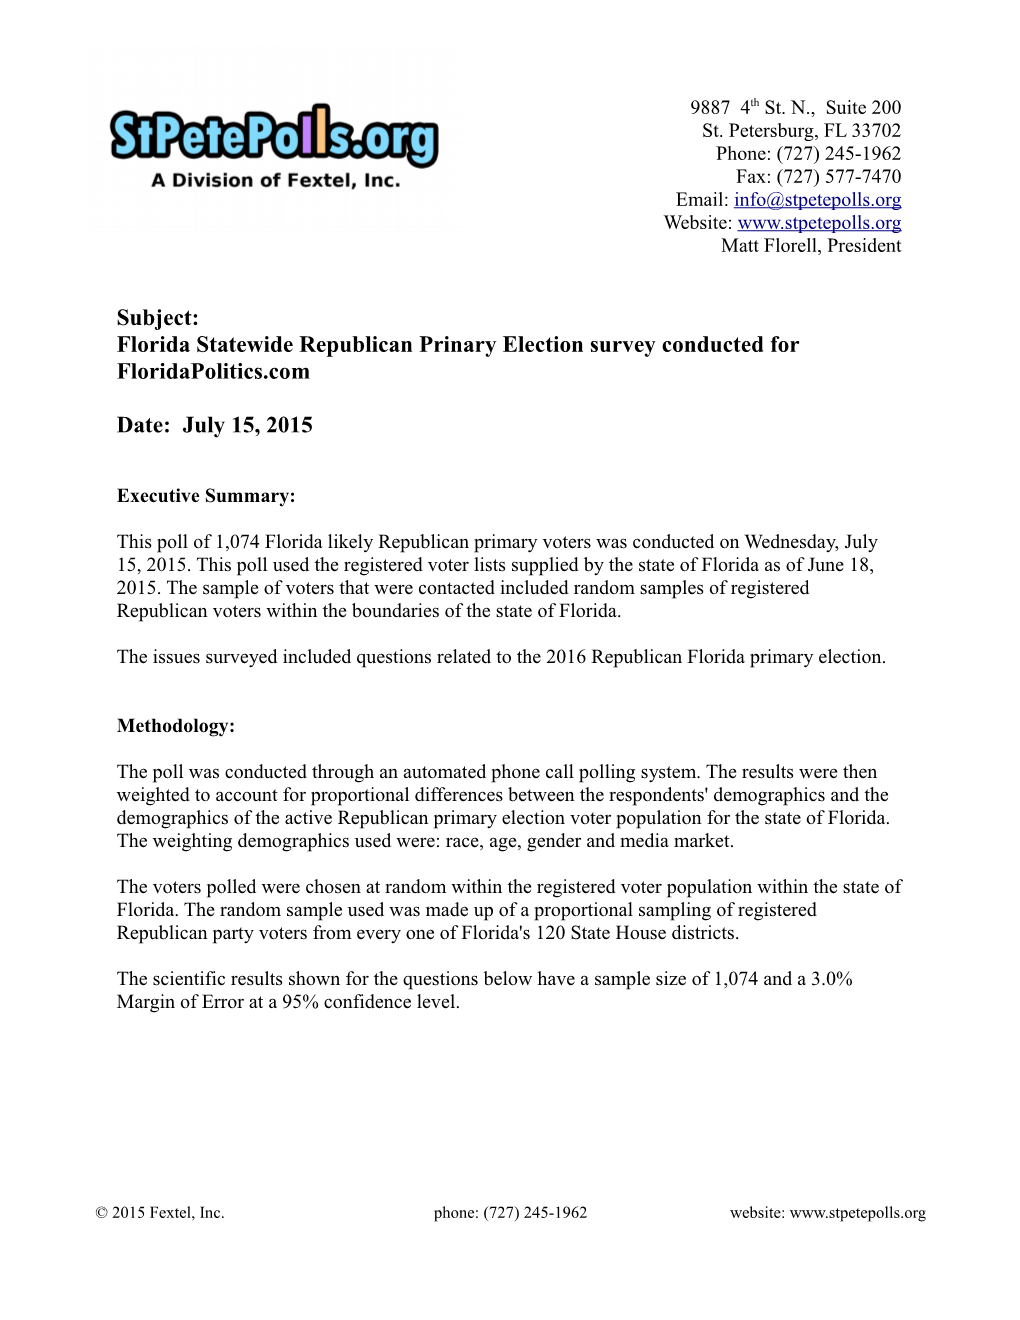 Subject: Florida Statewide Republican Prinary Election Survey Conducted for Floridapolitics.Com Date: July 15, 2015